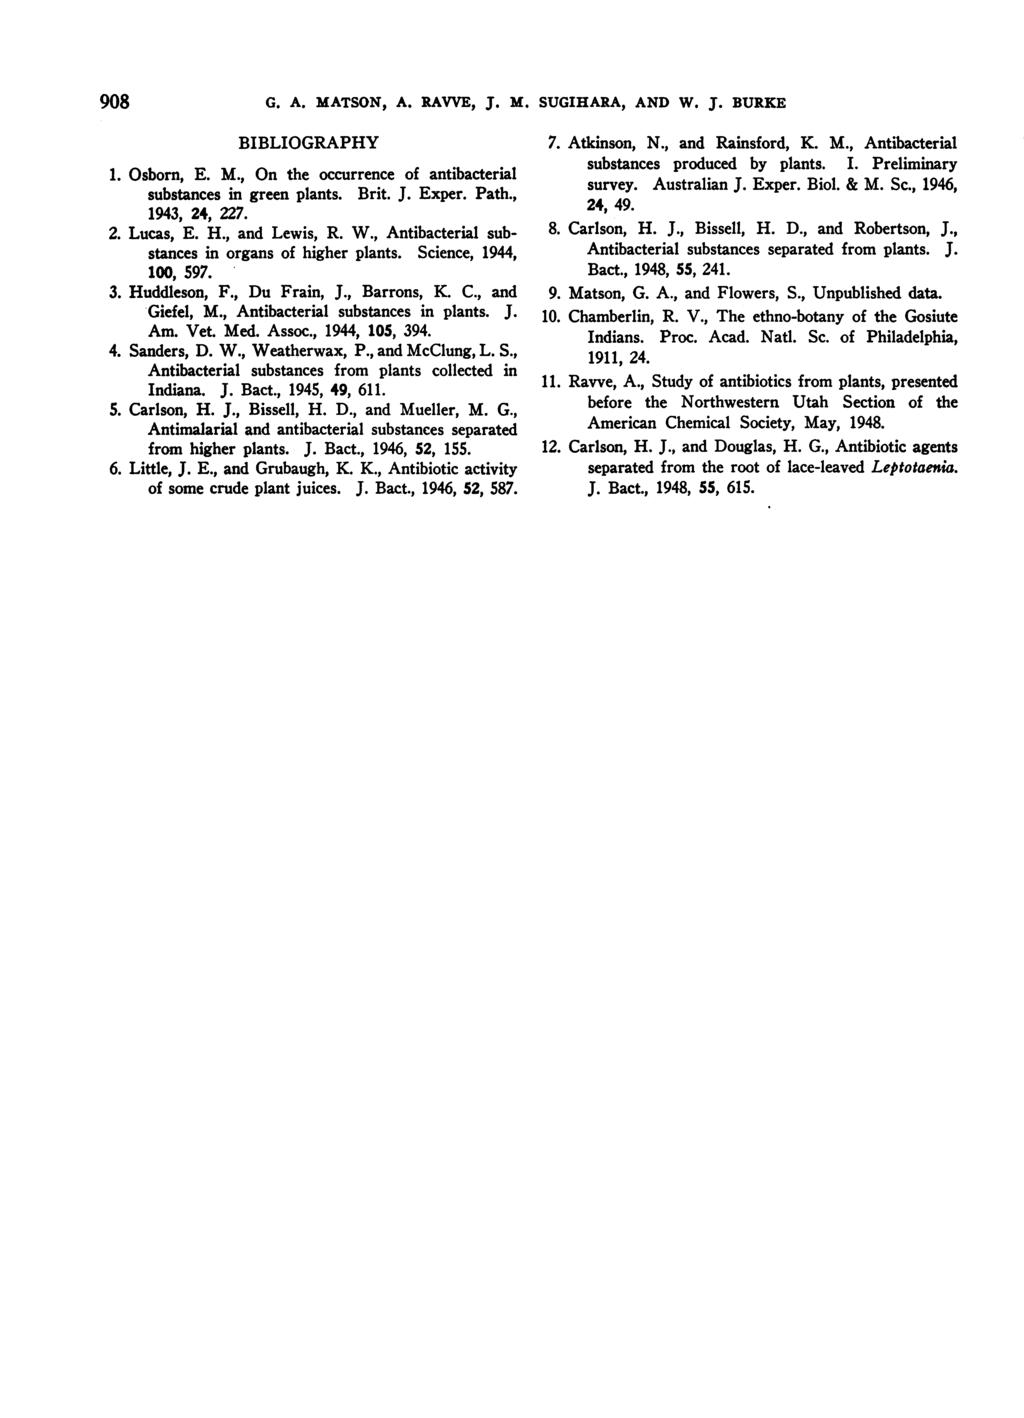 908 G. A. MATSON, A. RAVVE, J. M. SUGIHARA, AND W. J. BURKE BIBLIOGRAPHY 1. Osborn, E. M., On the occurrence of antibacterial substances in green plants. Brit. J. Exper. Path., 1943, 24, 227. 2. Lucas, E.